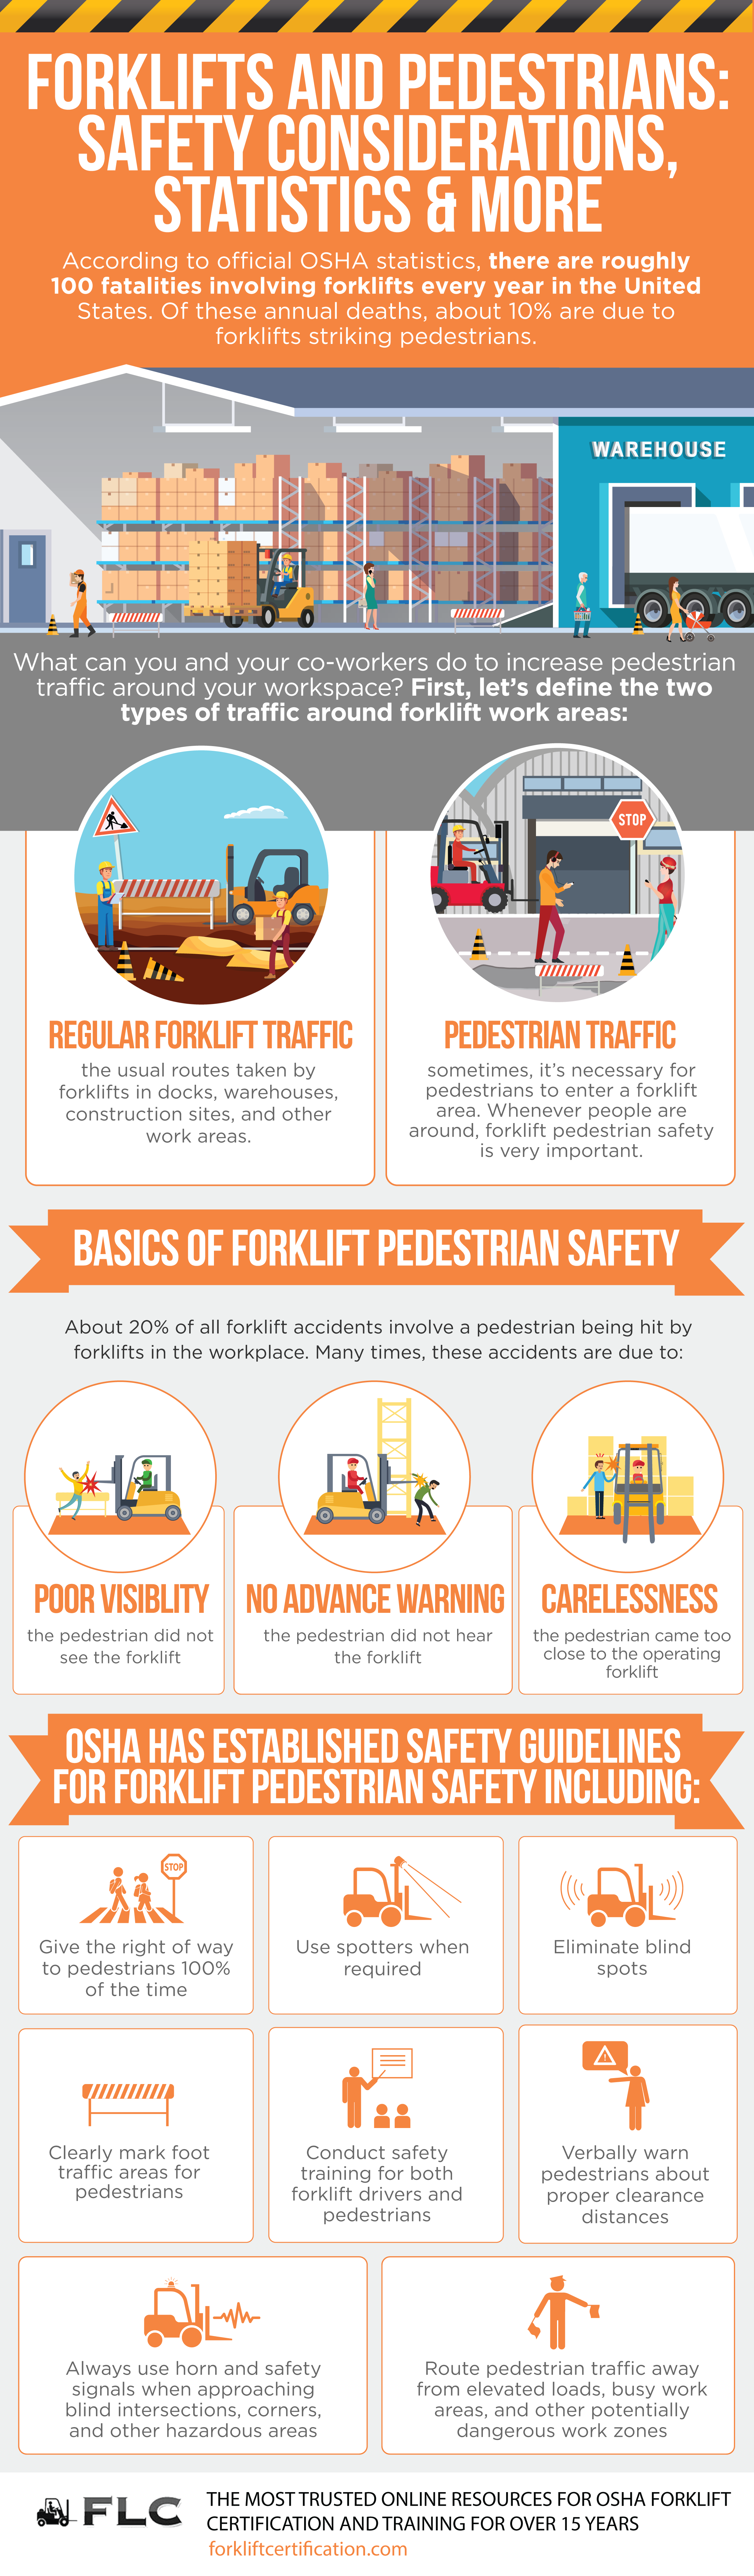 safety tips for forklifts and pedestrians in warehouses